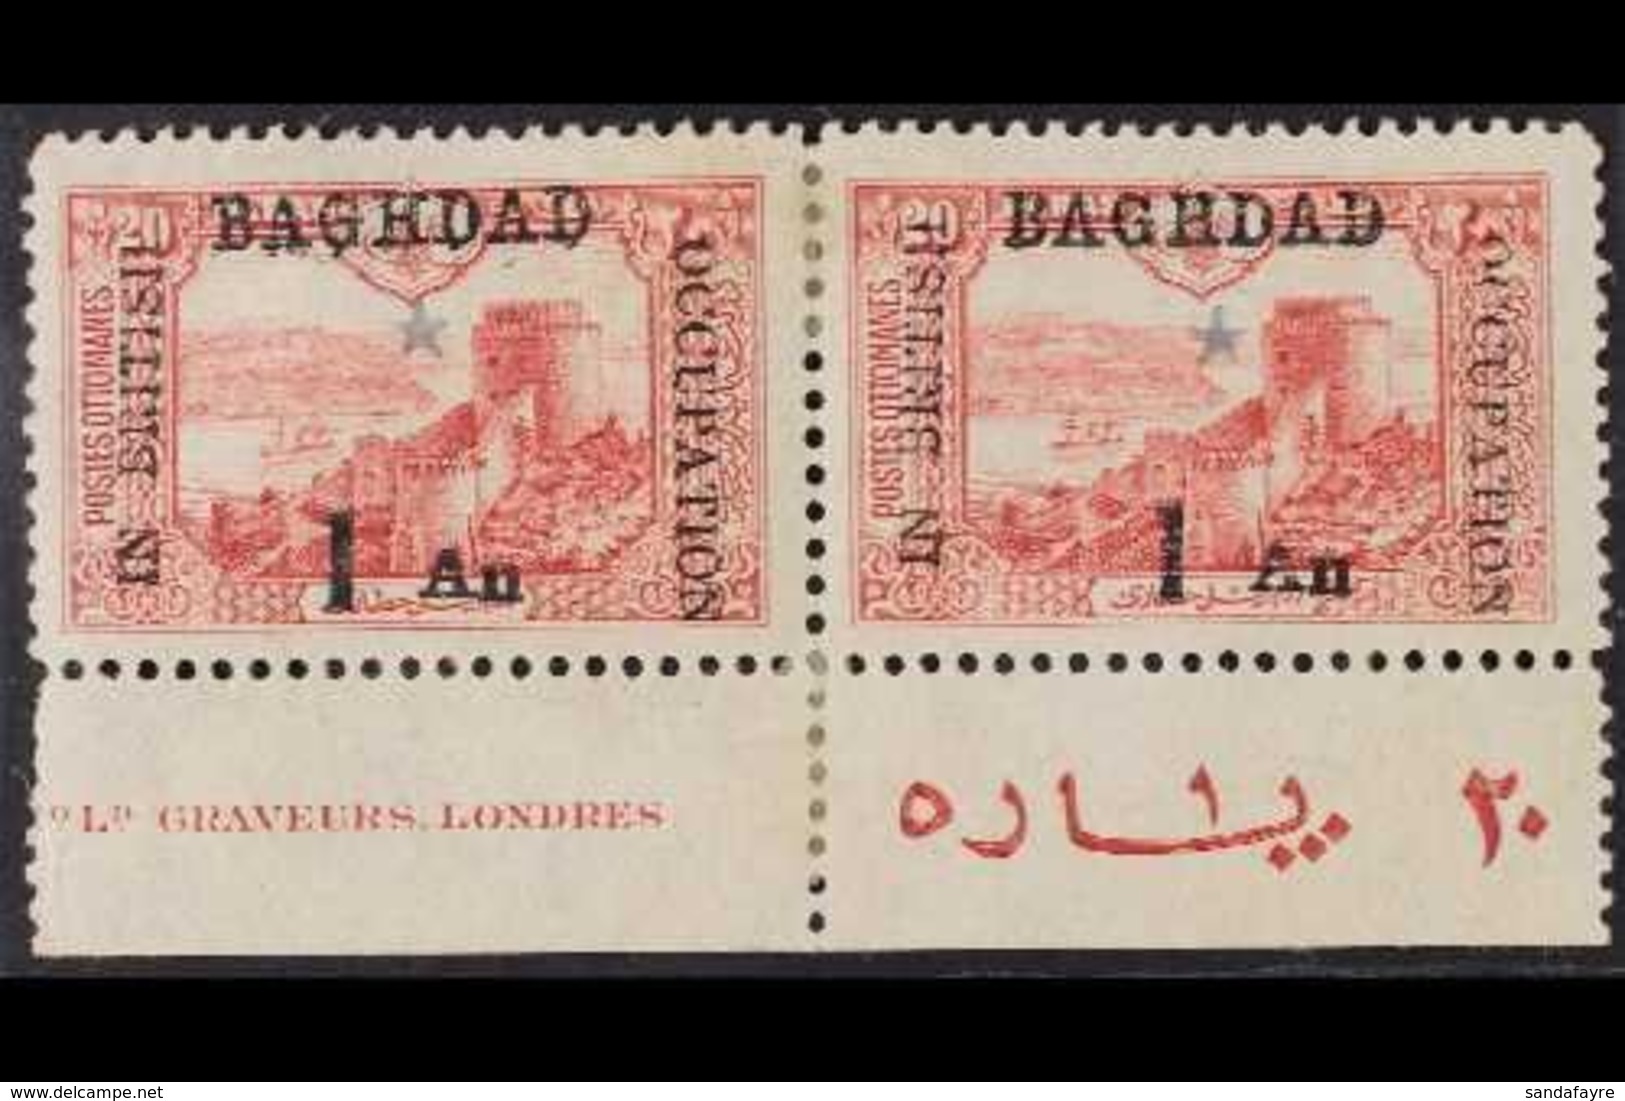 1917  1a On 20pa Red (Castle), SG 7, Mint PAIR With Lower Sheet Margin Showing Part British And Turkish Imprint Inscript - Iraq